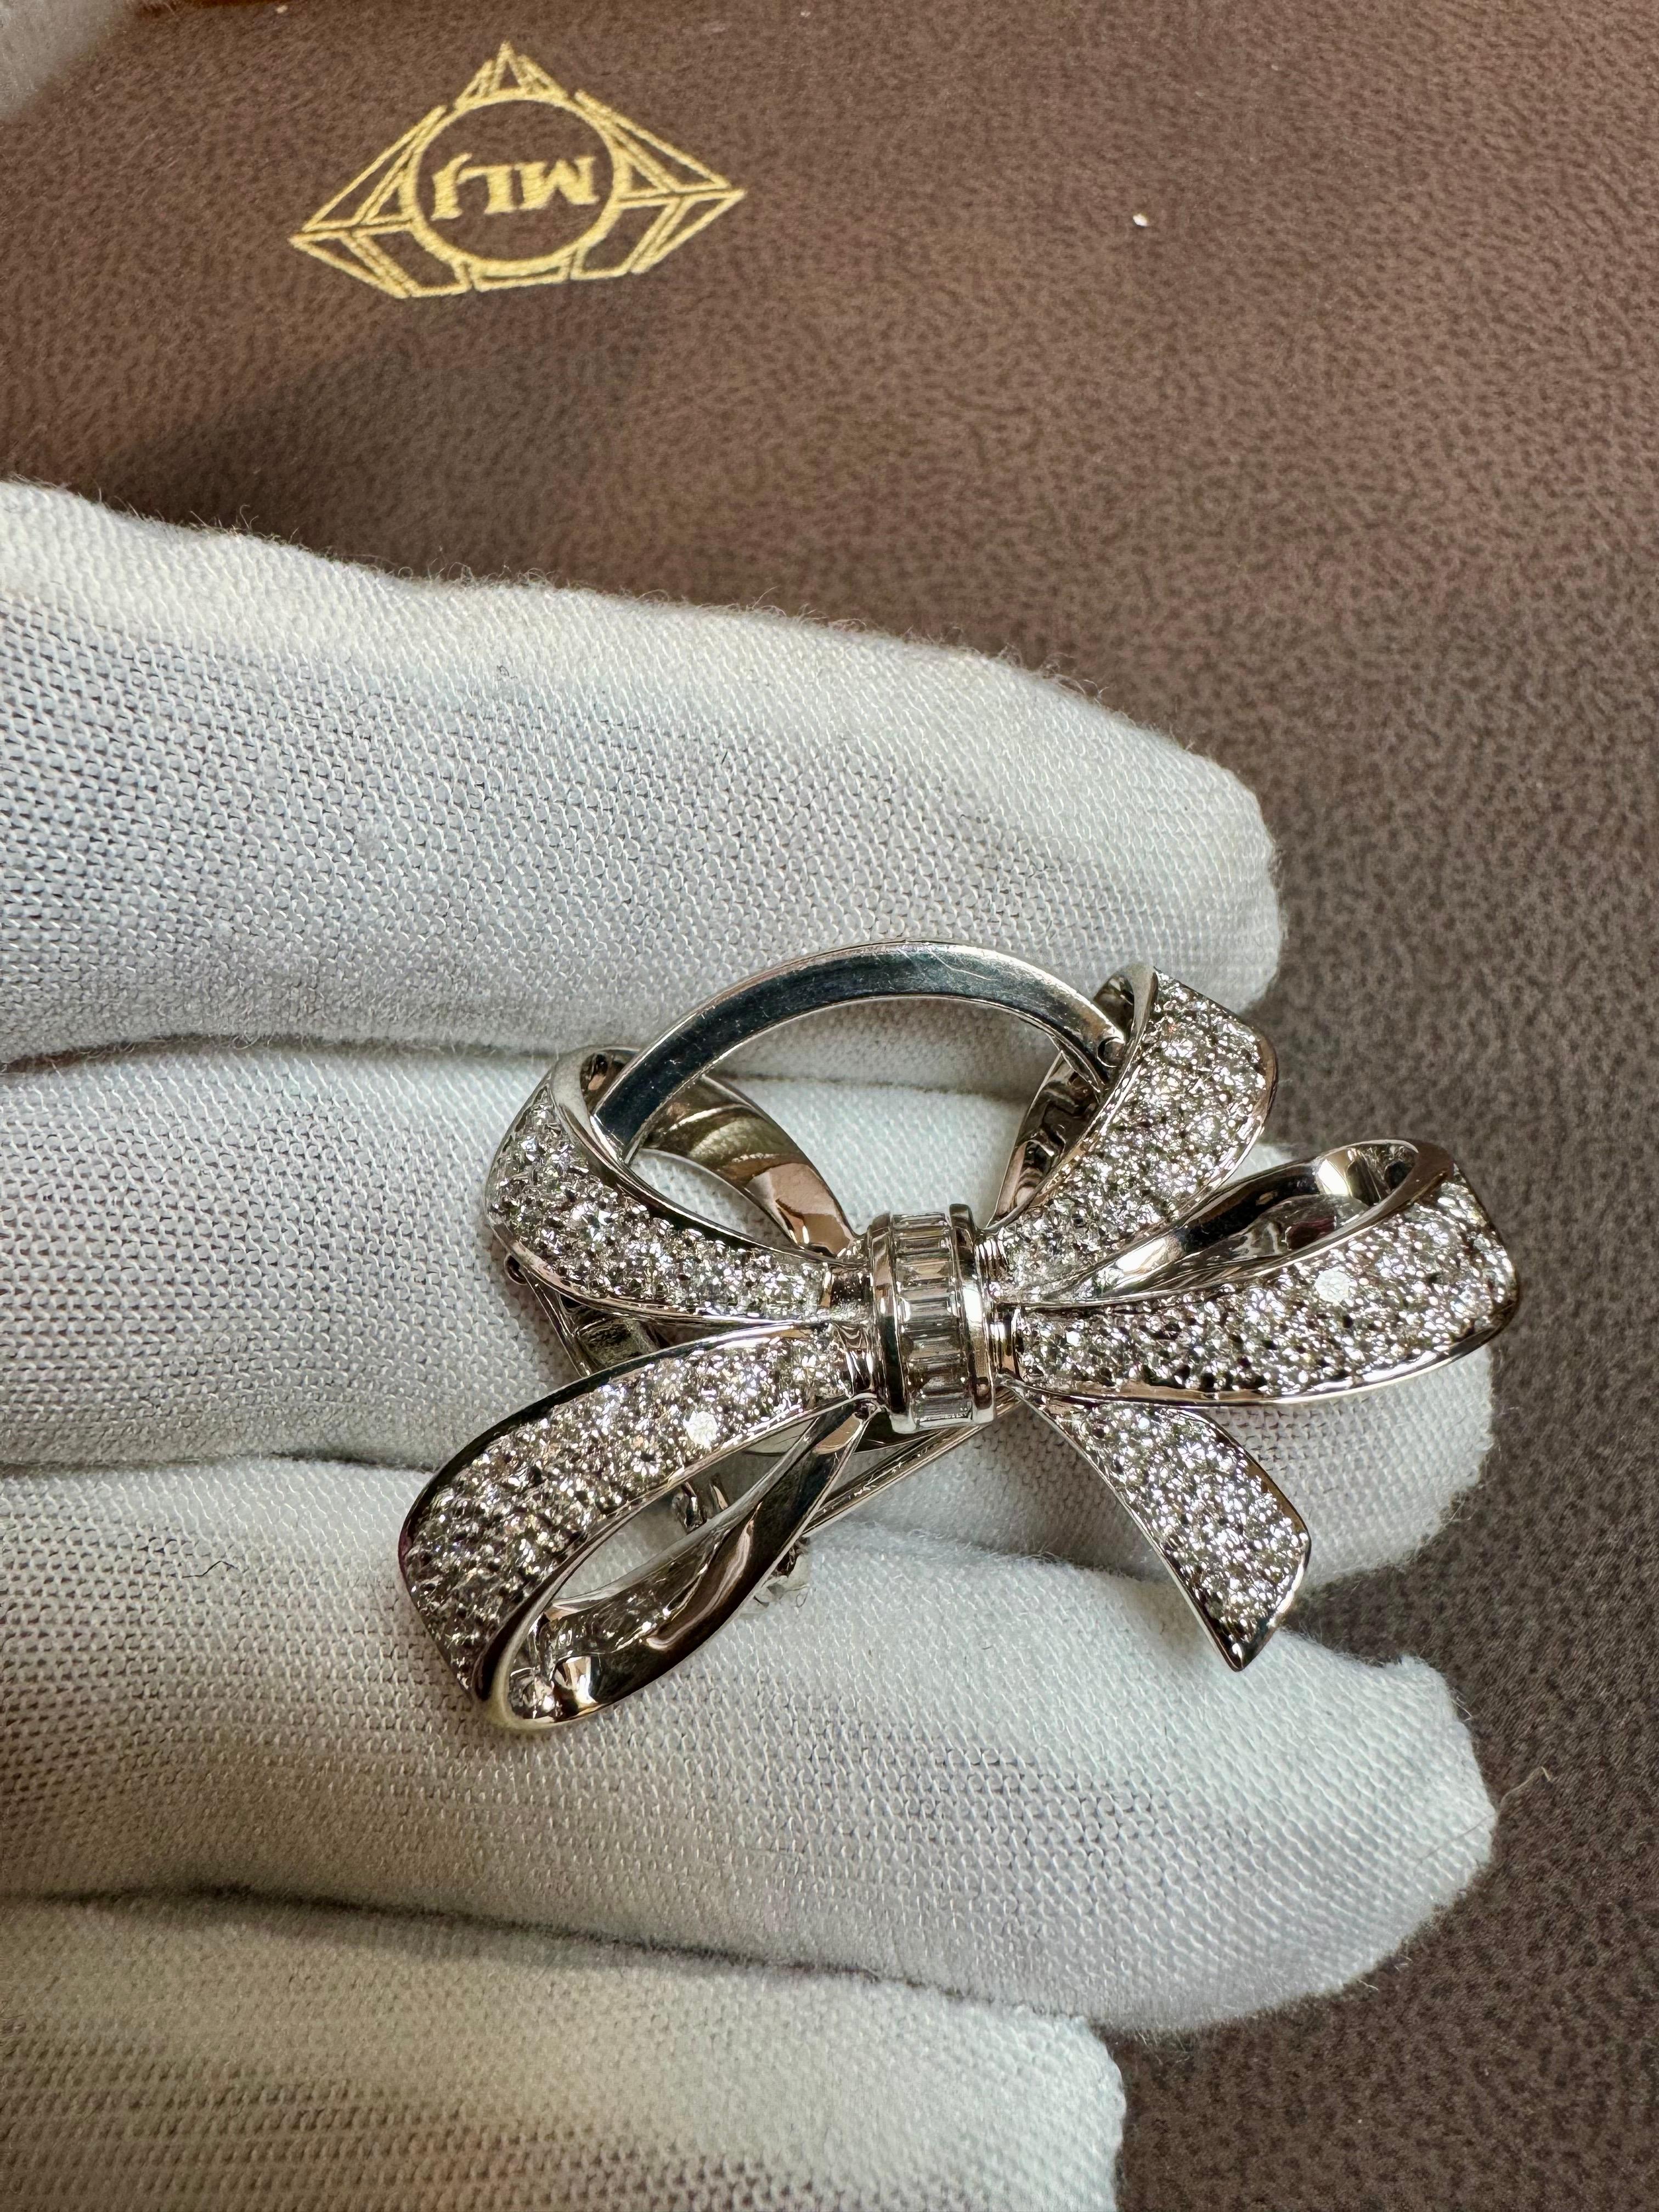 A  bow brooch / Pendant crafted in 18 Karat white gold and densely set with sparkling bright white (G-H color) baguette (in the center) and round cut diamonds.

Estimated total diamond weight 2.55 ct.

Width 1 .5 Inches
This can be used as a